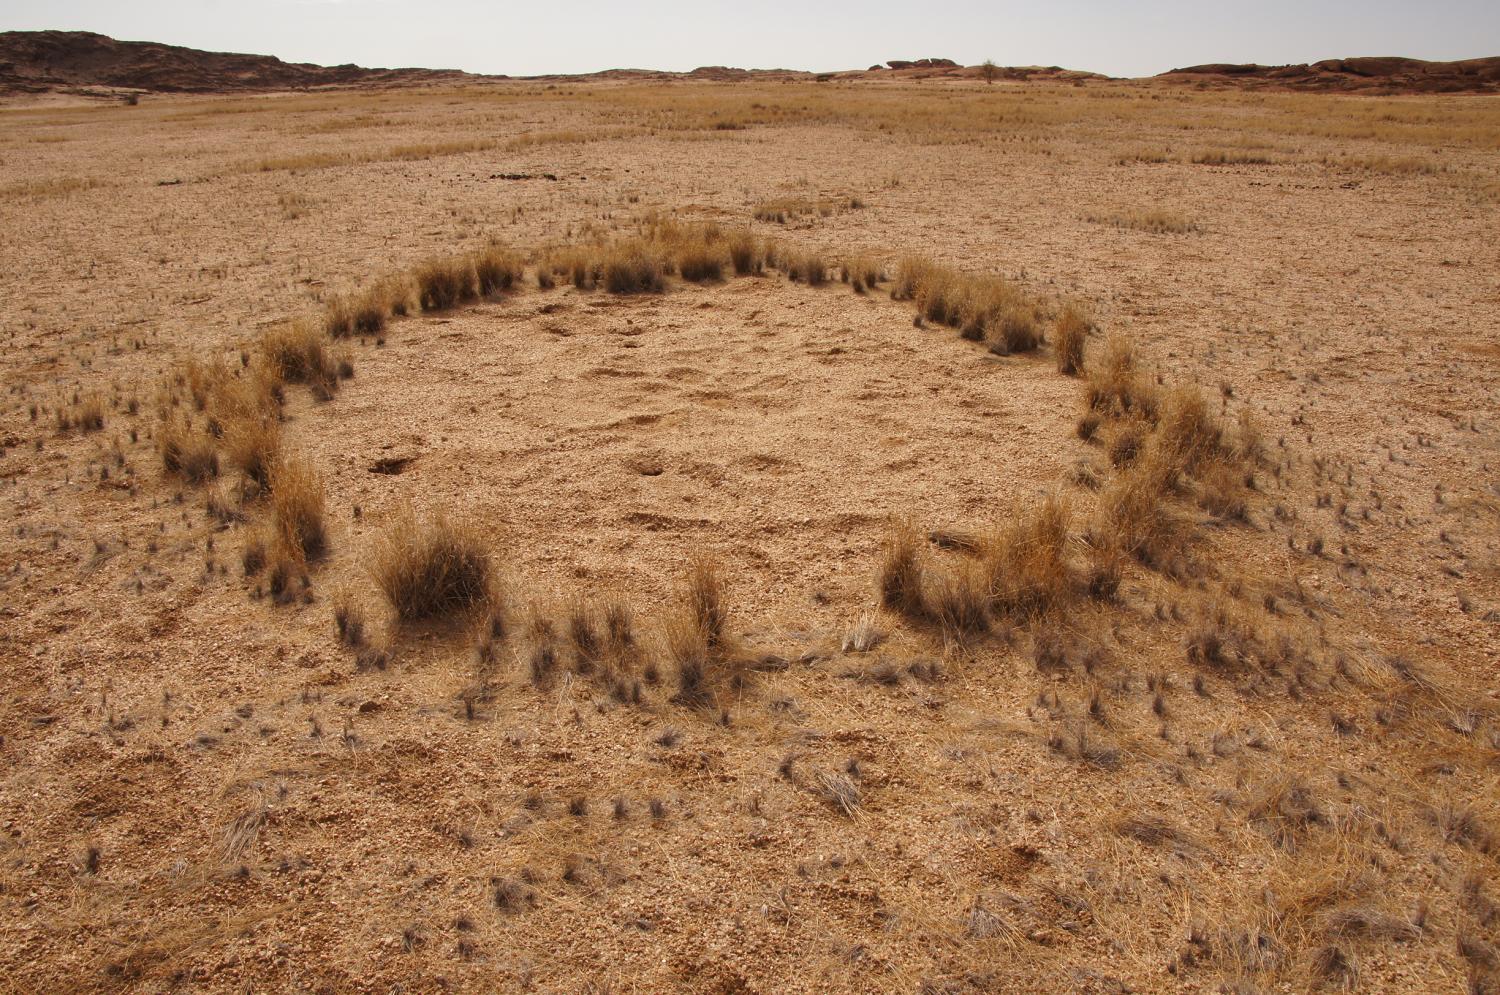 Researcher weighs in on fairy circles of Namibia